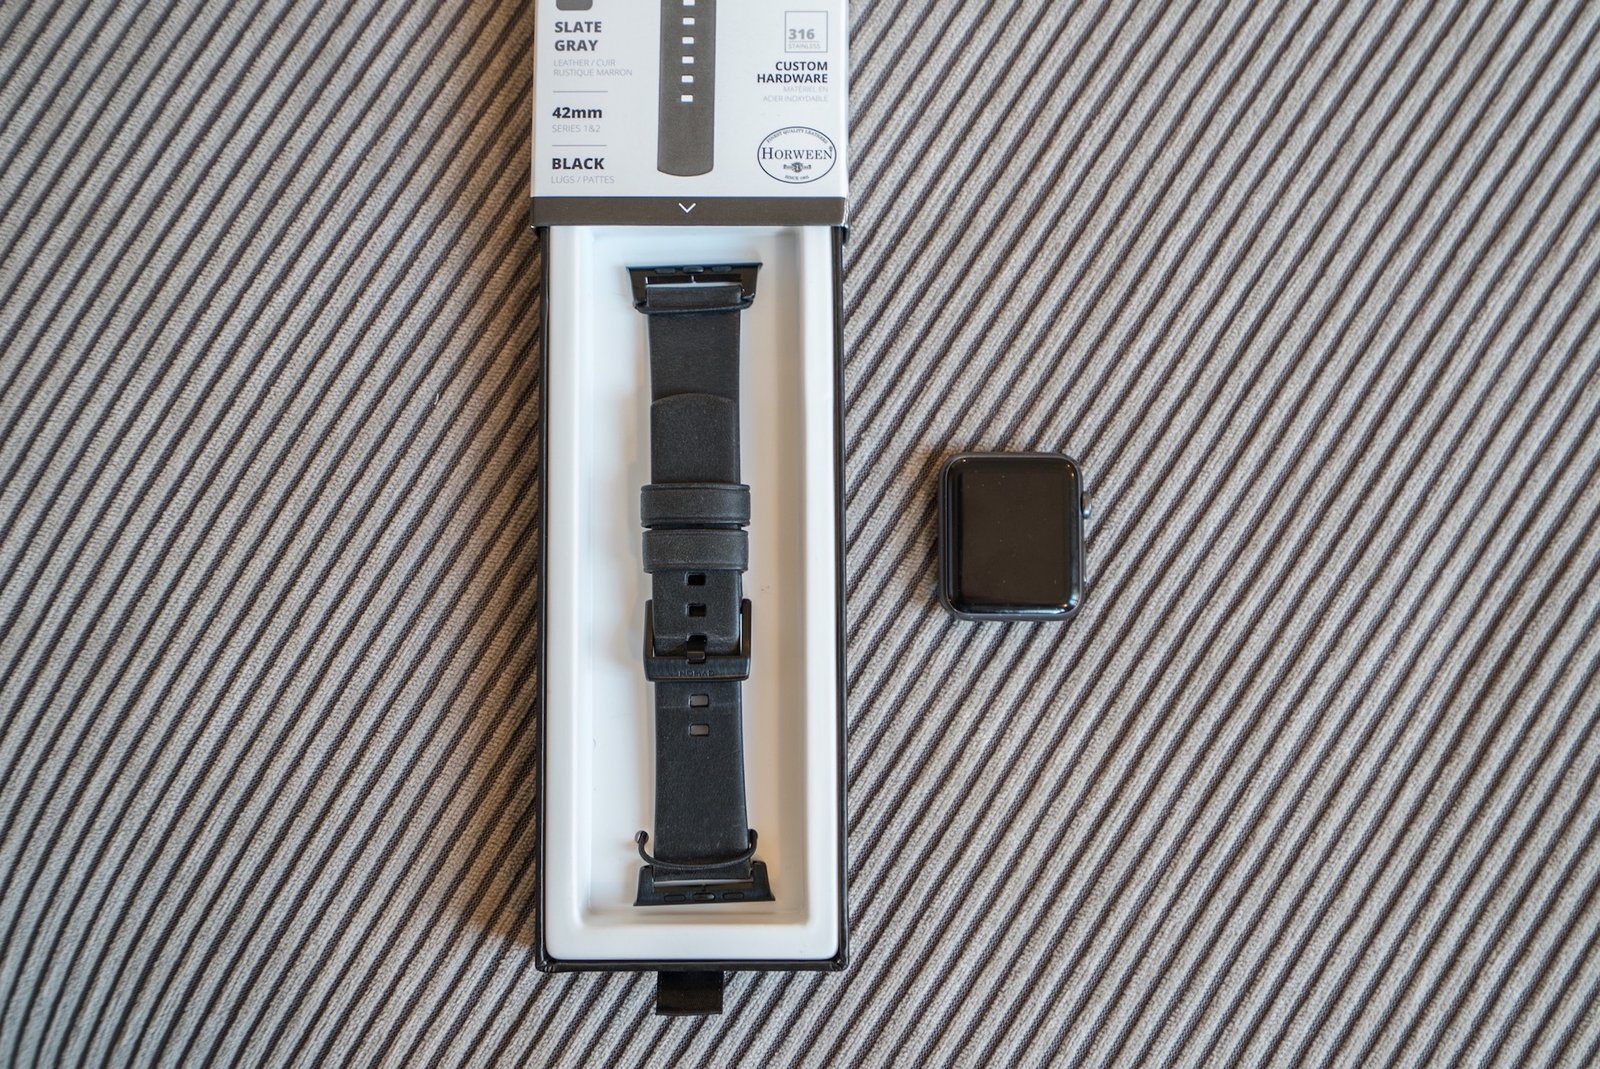 Nomad Apple Watch band